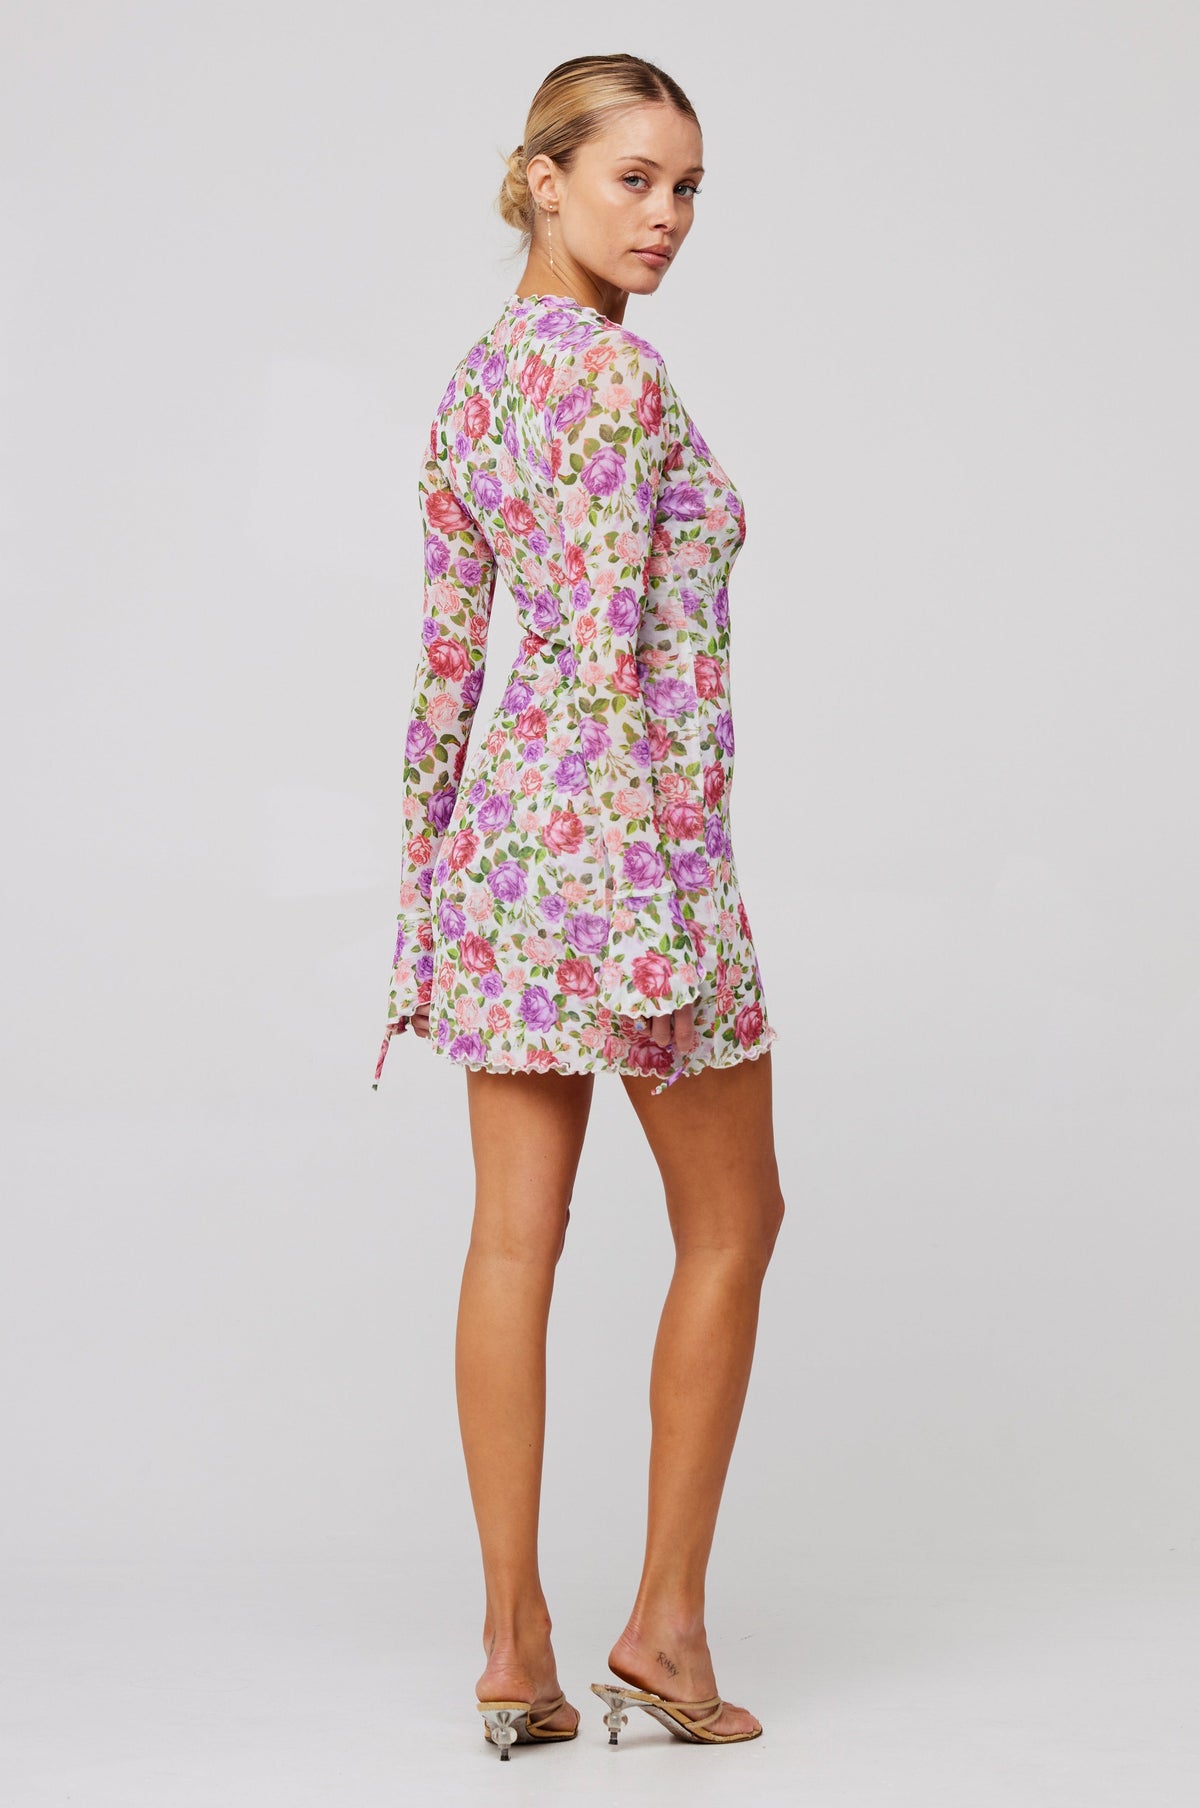 This is an image of Sloane Mini in Vintage Floral - RESA featuring a model wearing the dress